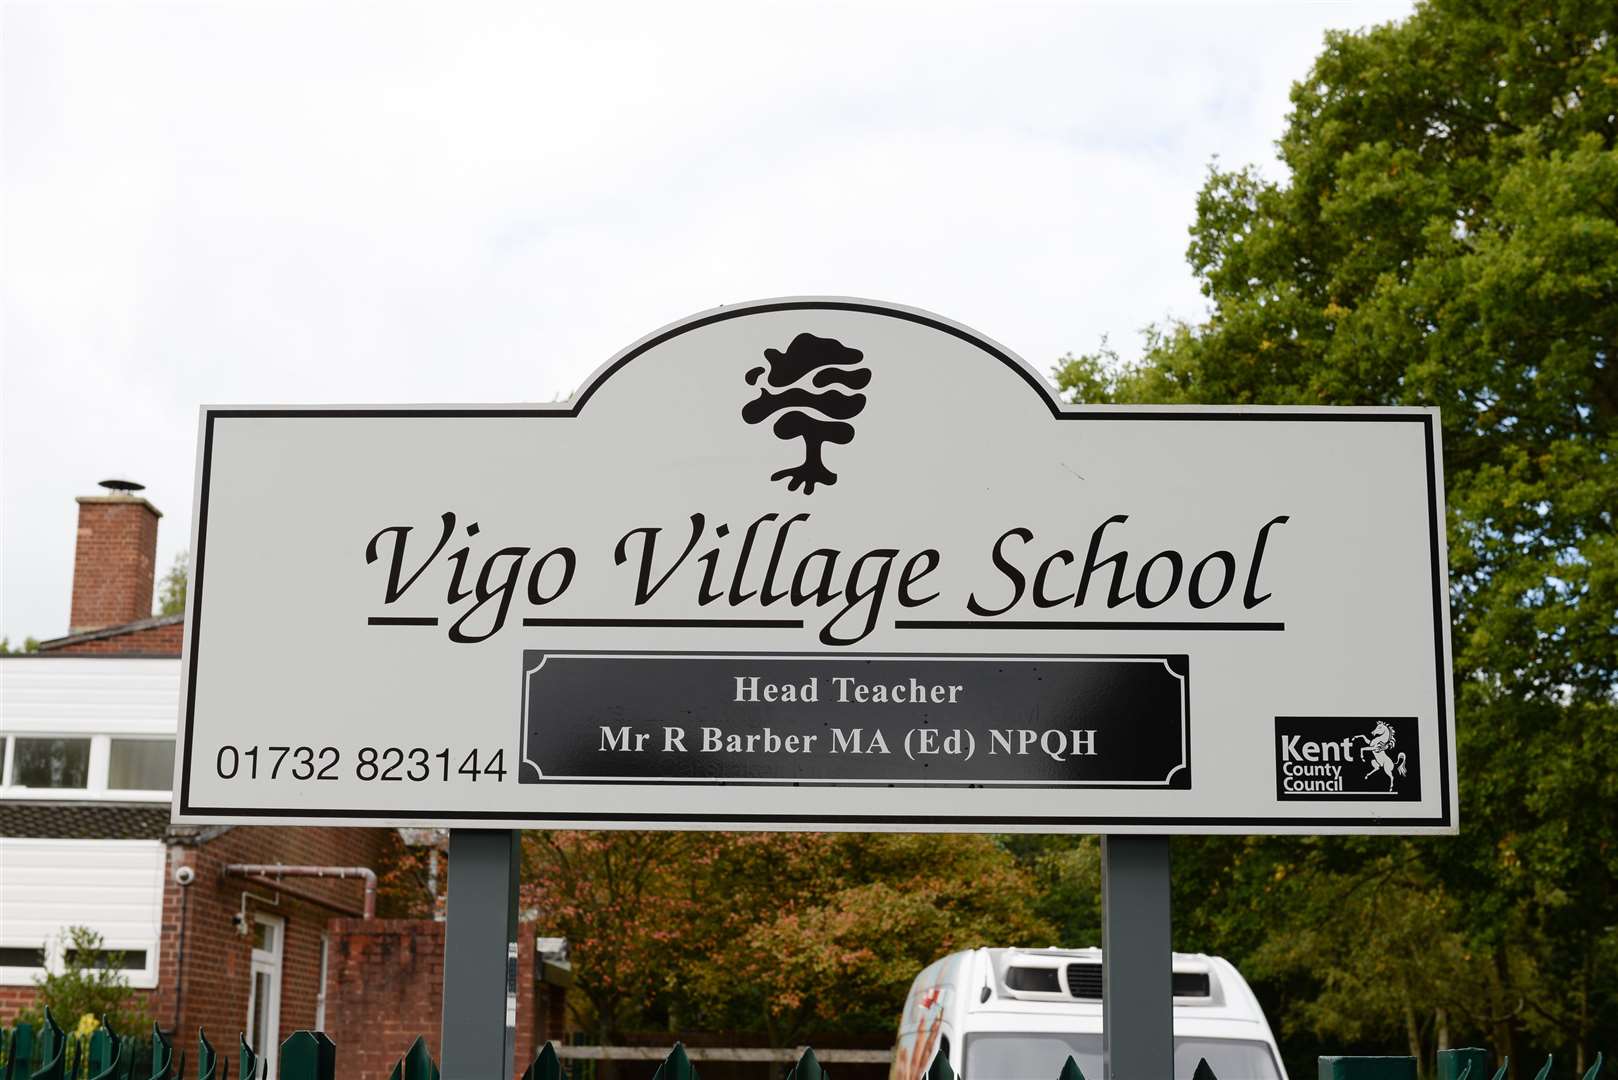 A pupil from Vigo Village School has been tested for Covid-19 after returning home from school with a cough